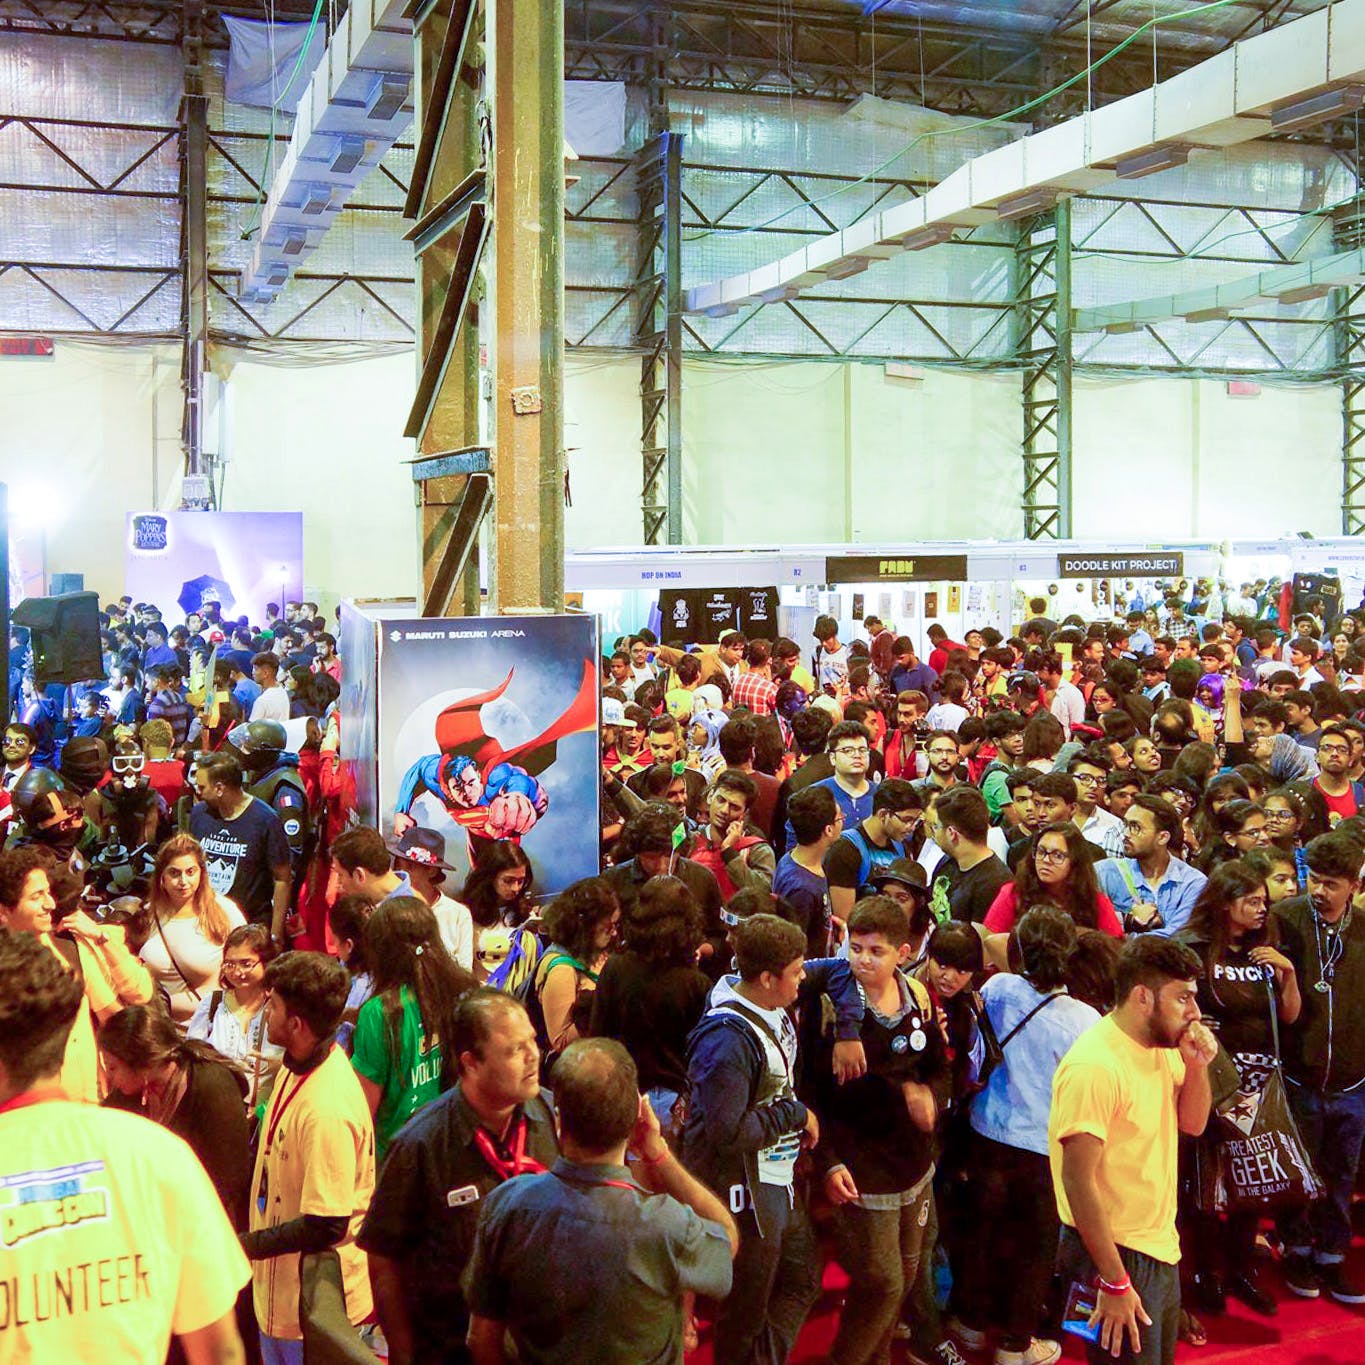 Crowd,People,Event,Community,Audience,Youth,Fan convention,Fun,Convention,Leisure